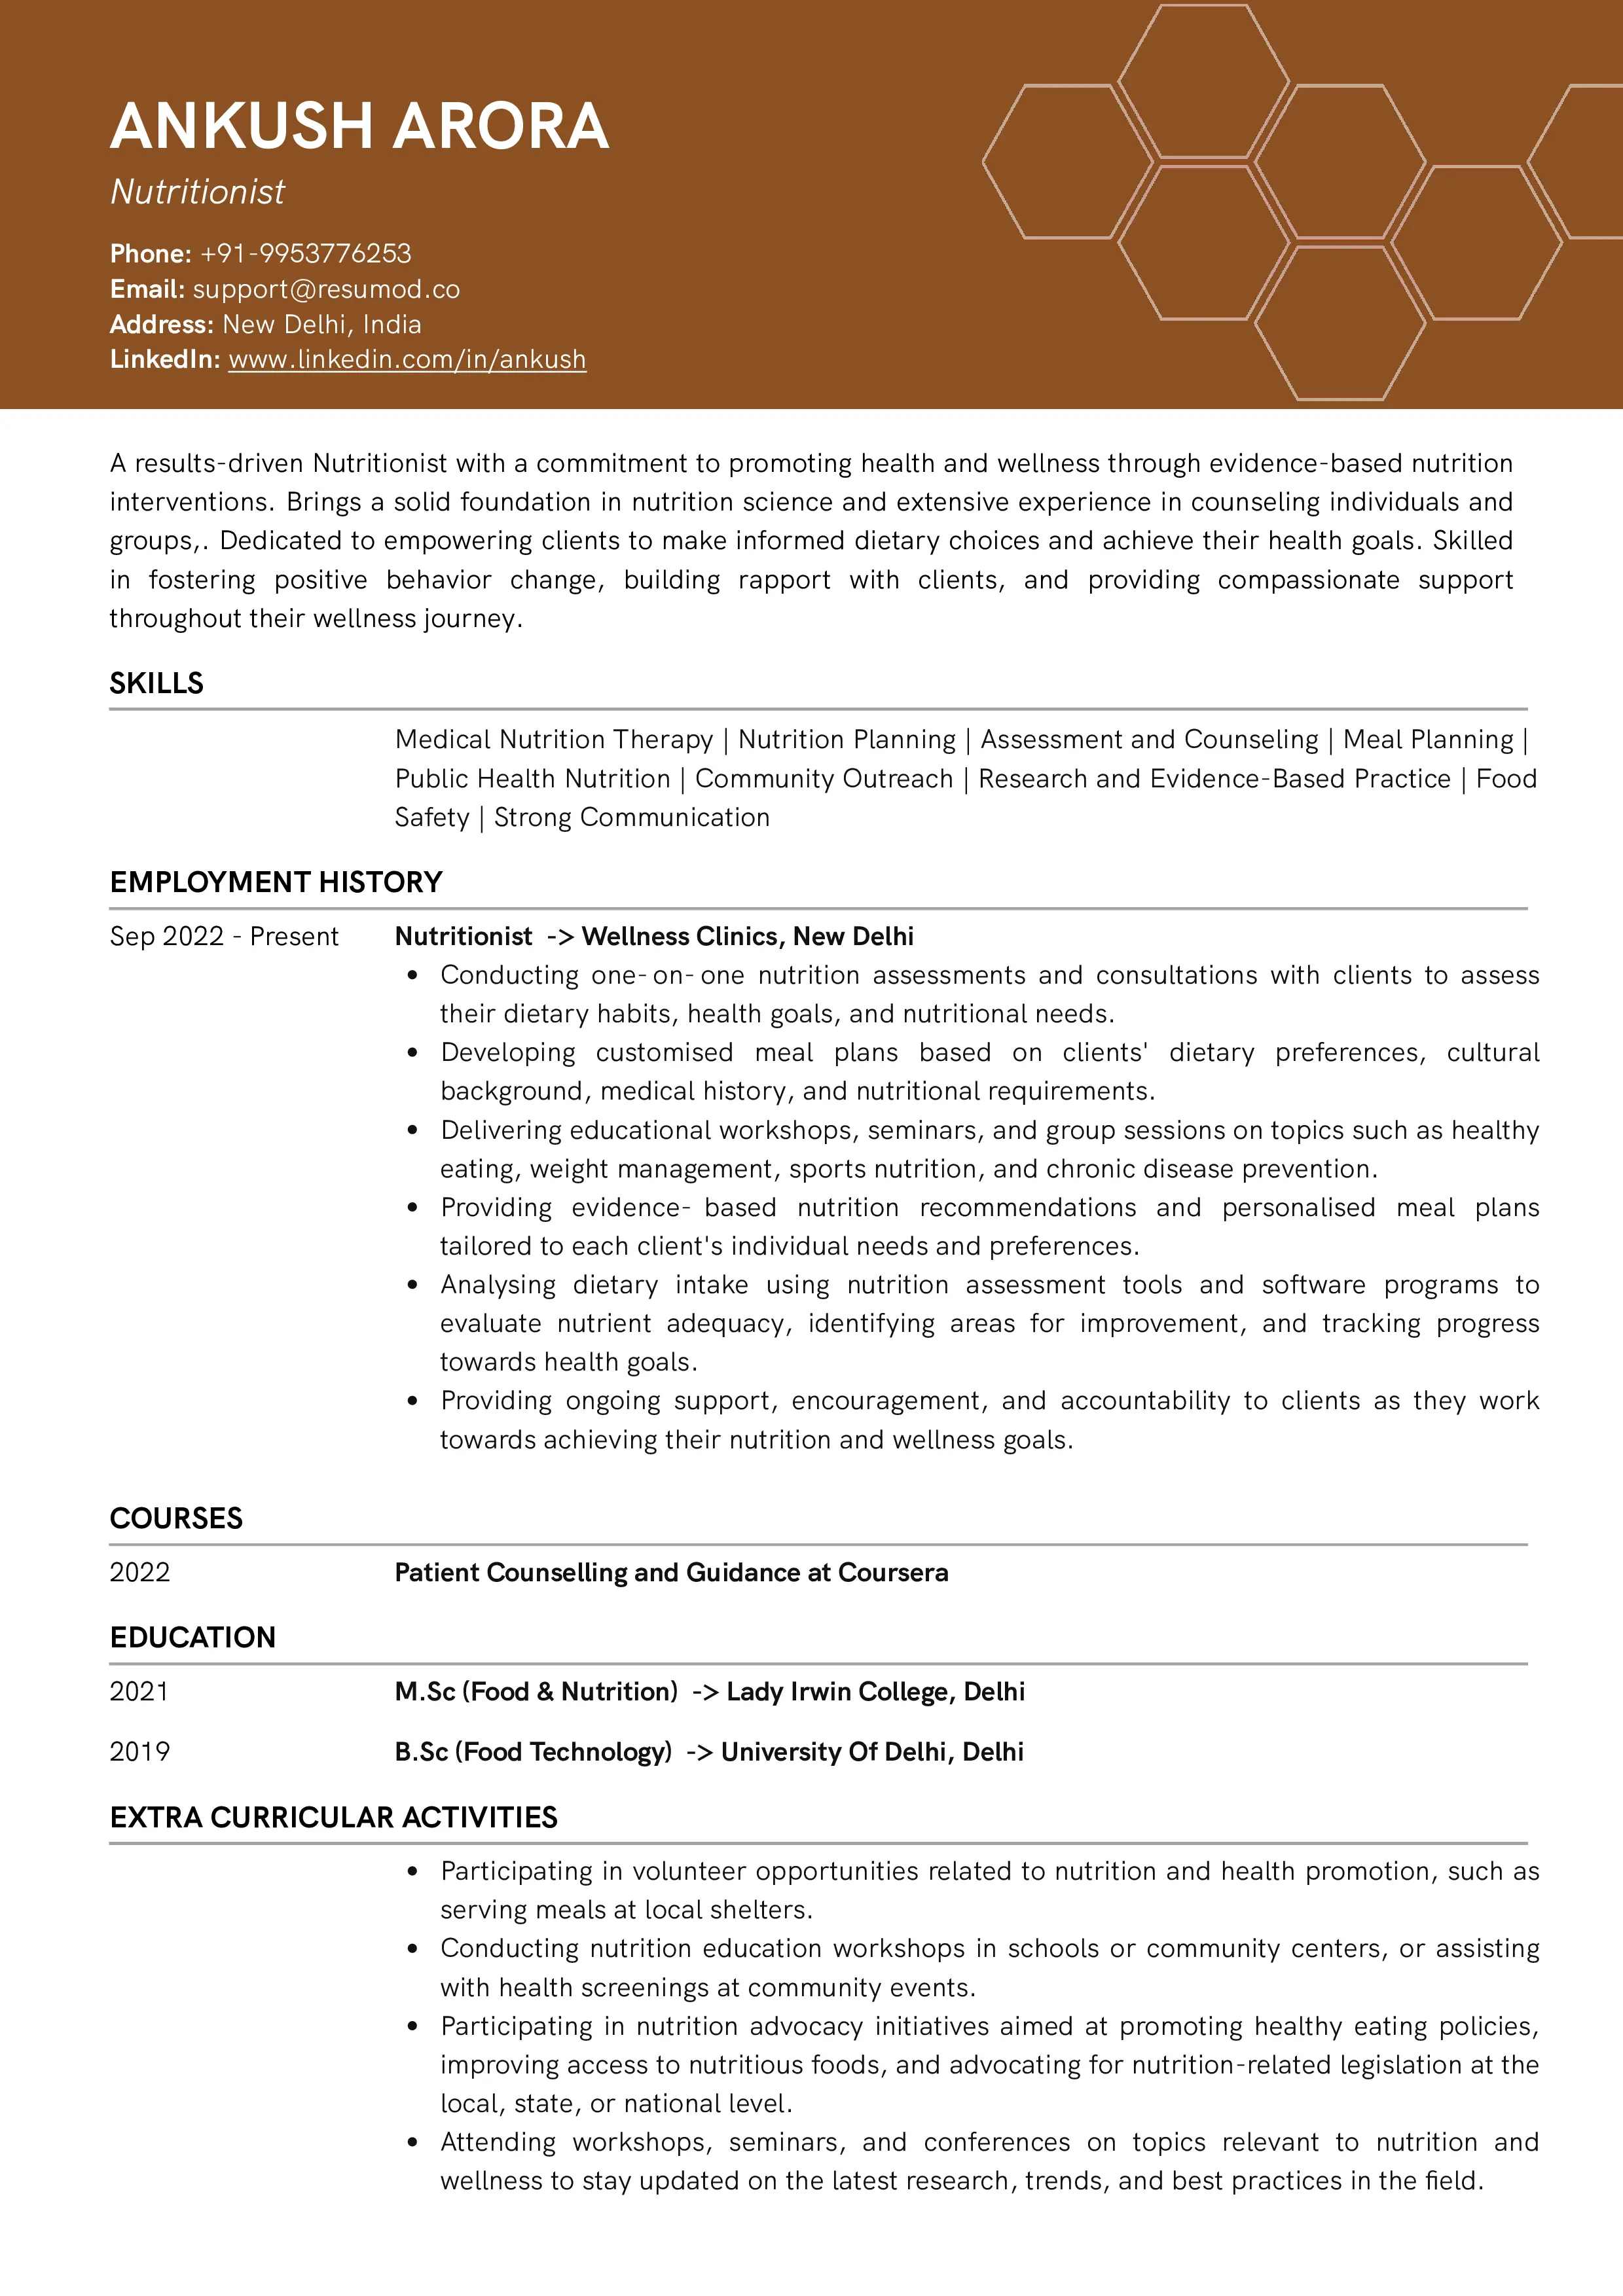 Sample Resume of Nutritionist | Free Resume Templates & Samples on Resumod.co